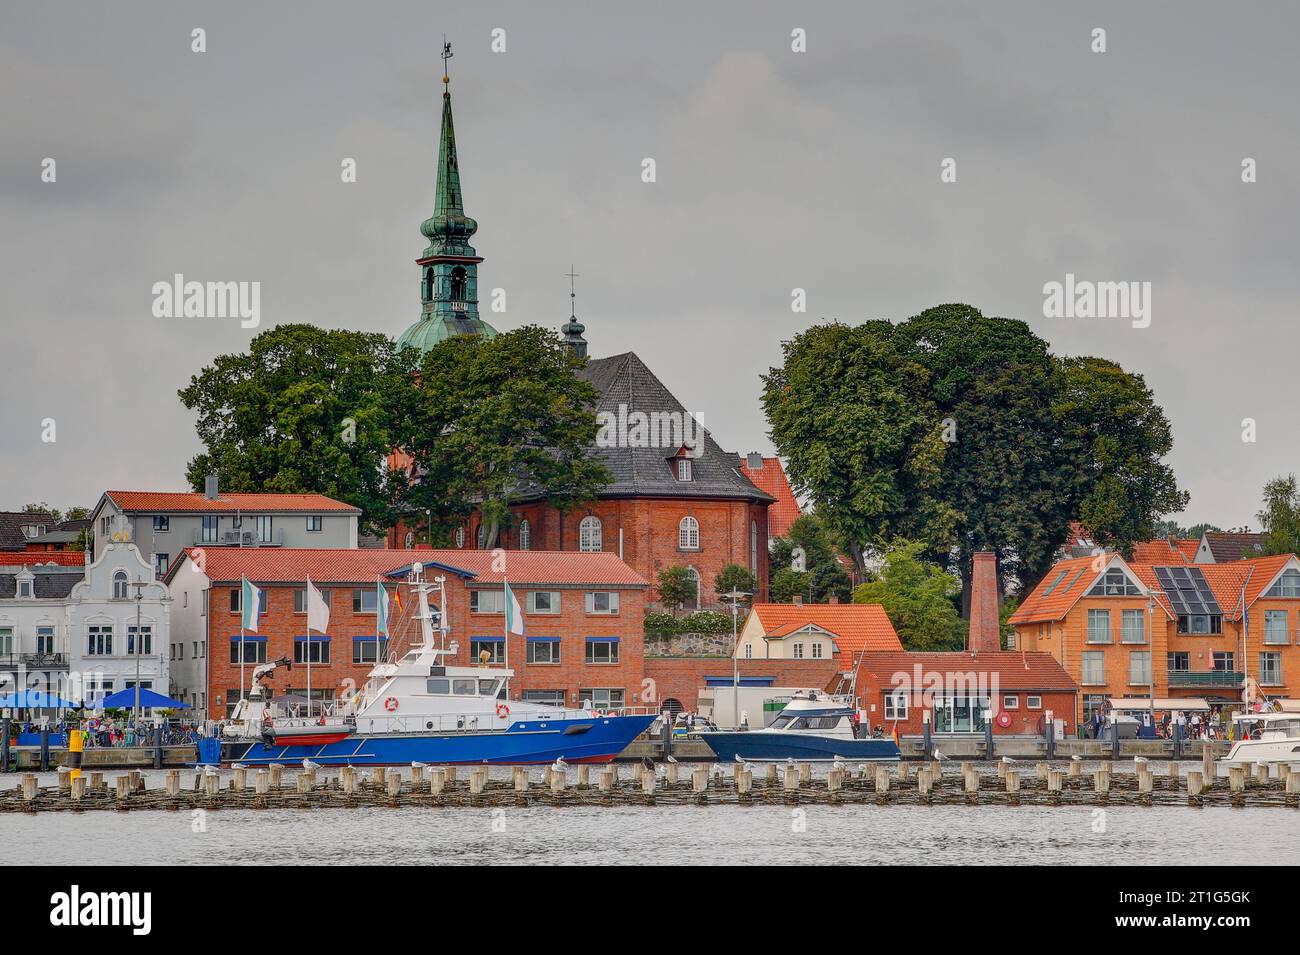 The picturesque harbor of the town of Kappeln on the Schlei with the St. Nikolai Church in the background. Stock Photo